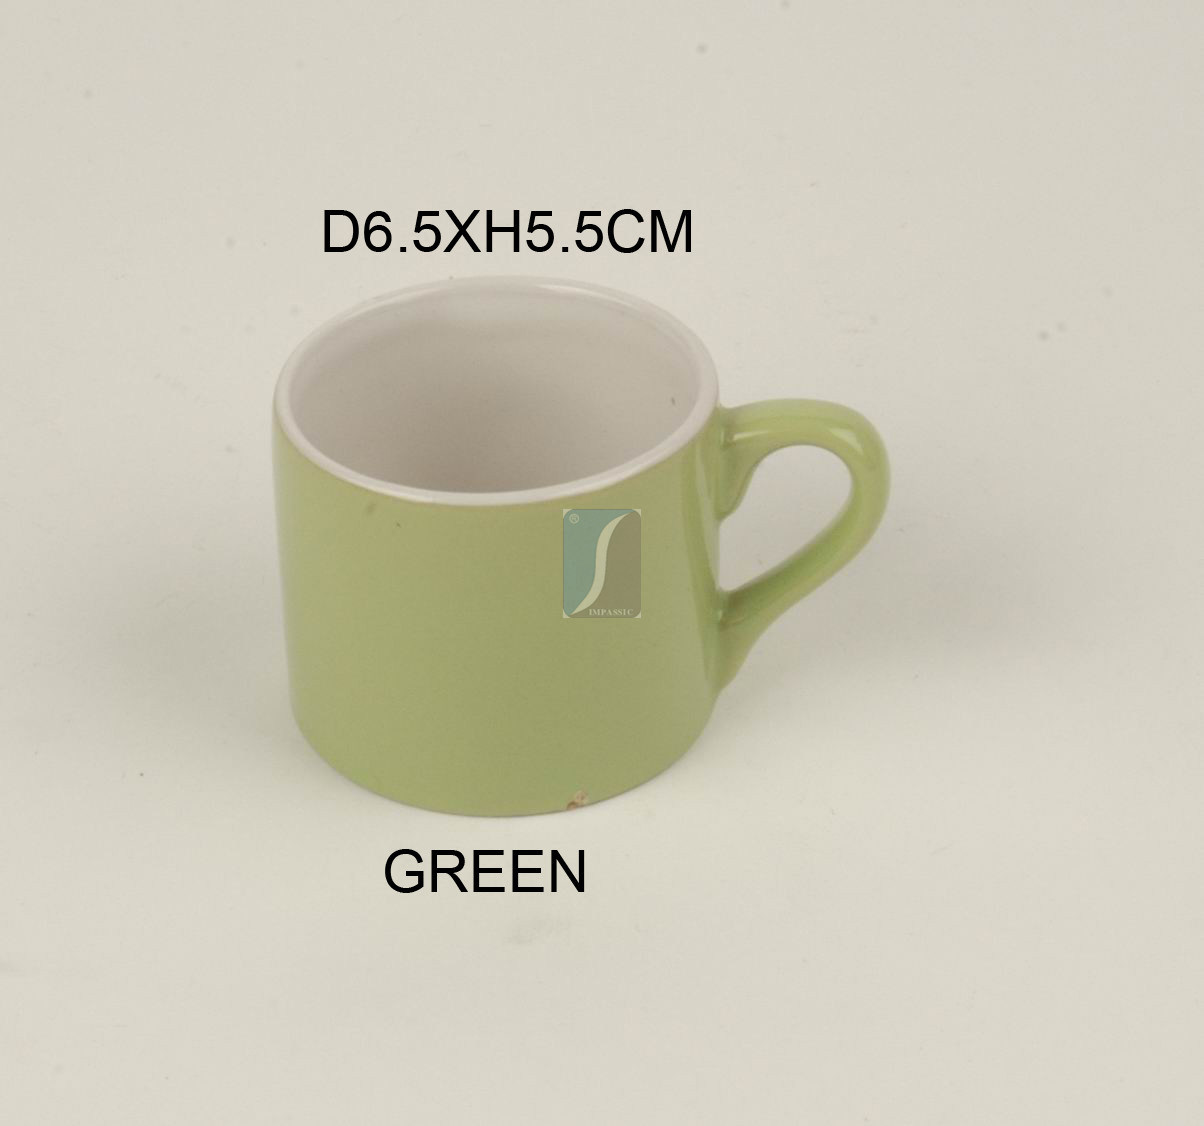 2015 Year China Suppliers Hot Selling Ceramic Mug for Made in China Factory Wholesale